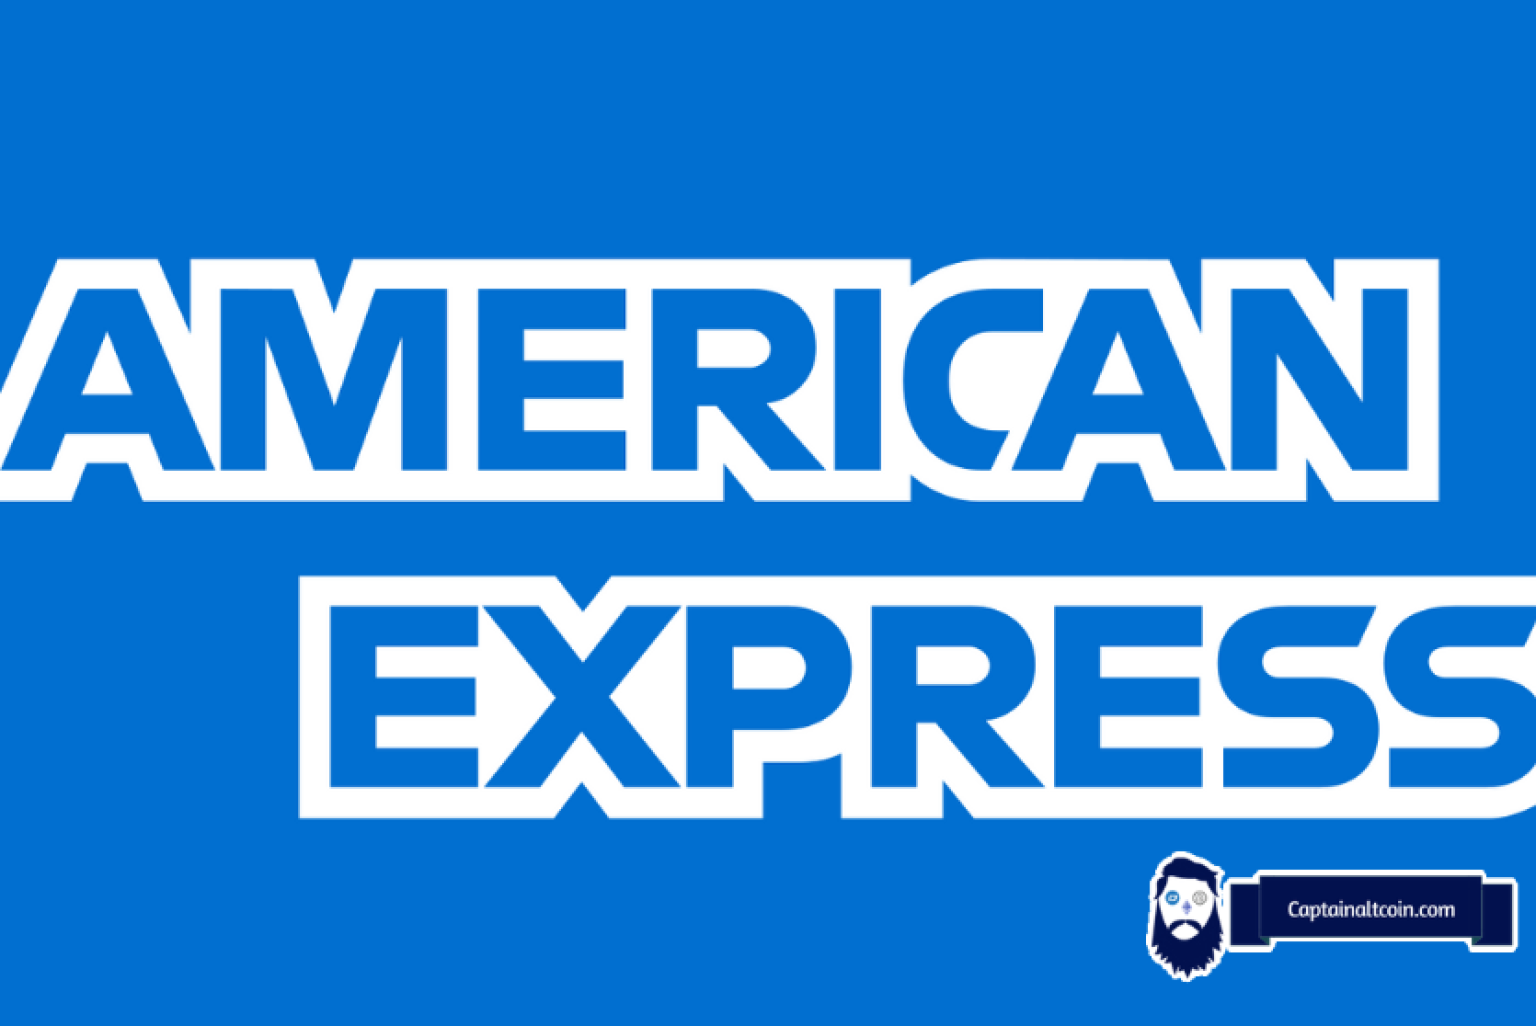 crypto exchanges that accept amex